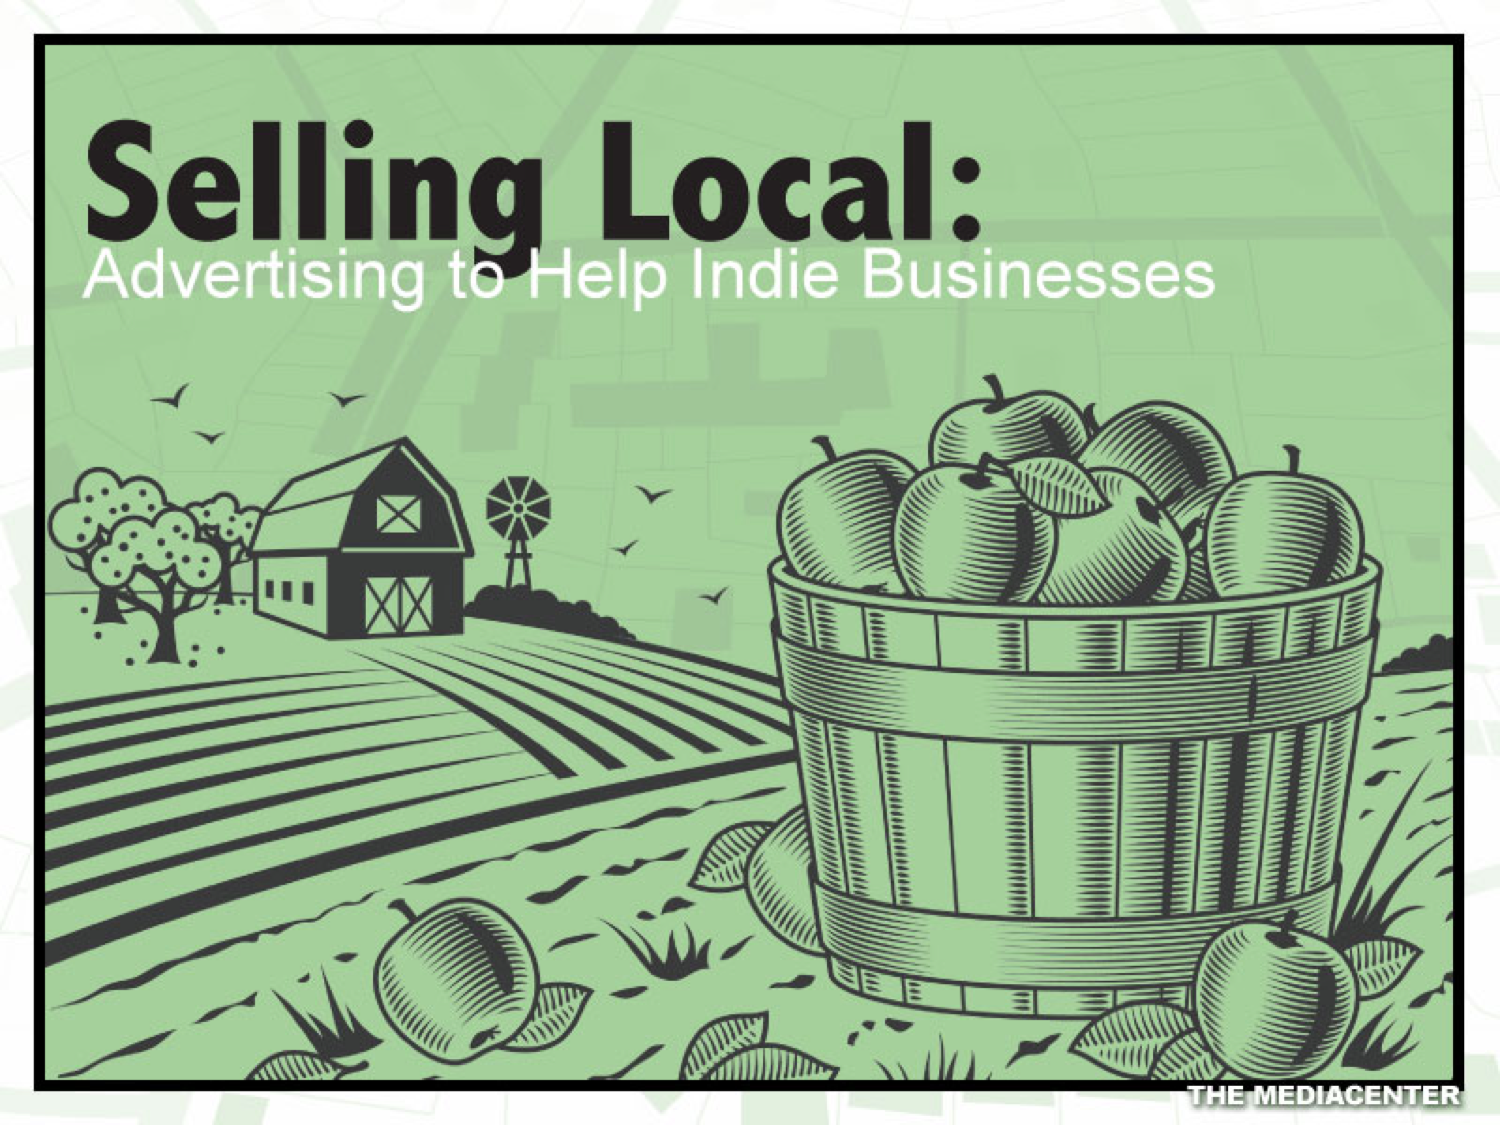 SELLING LOCAL: ADVERTISING TO HELP INDIE BUSINESSES